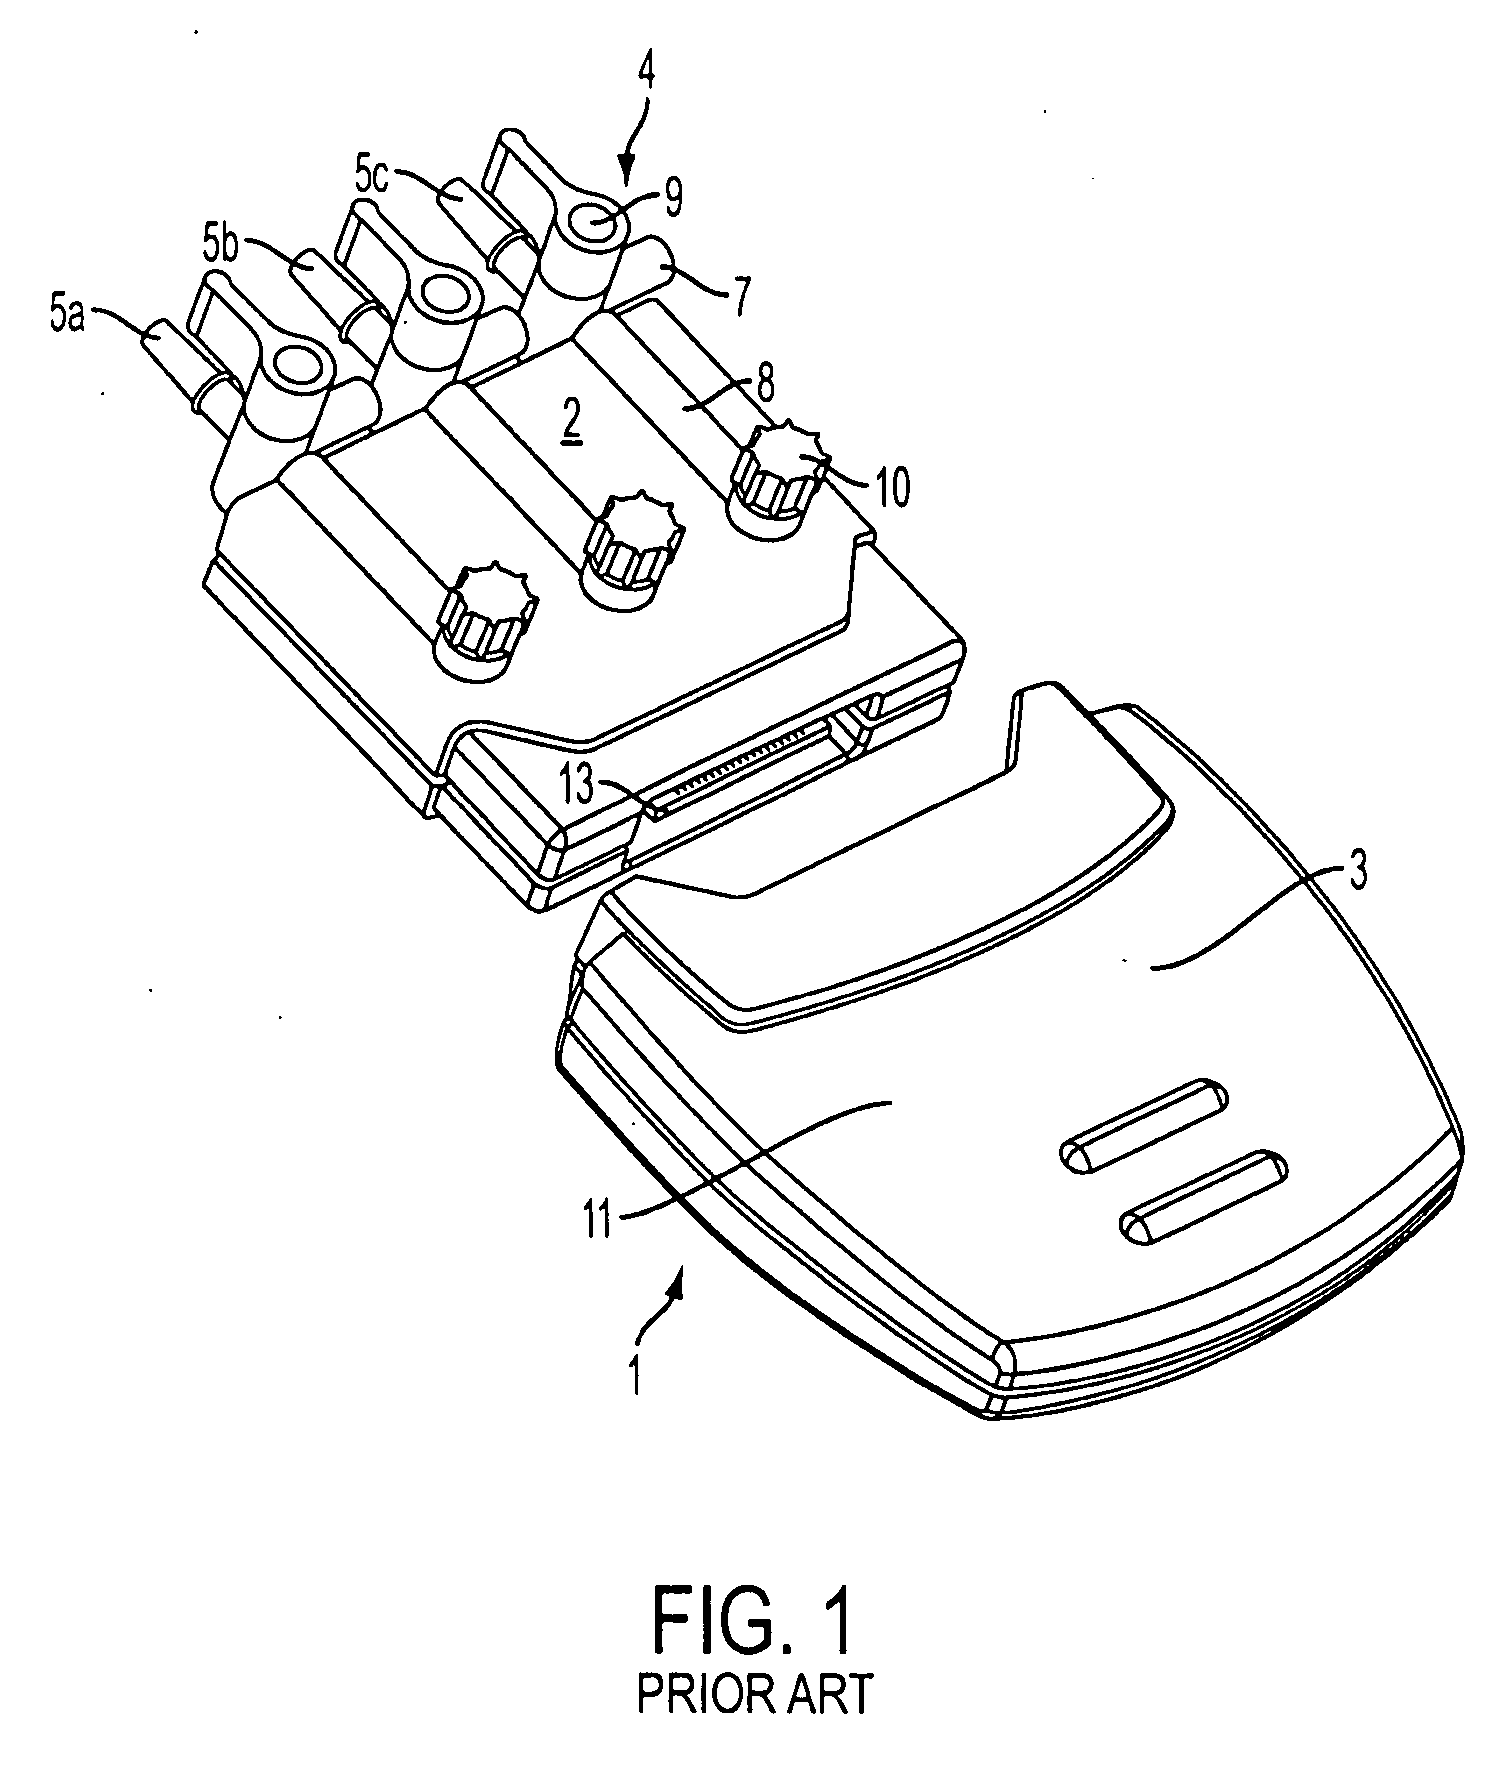 System and method for measuring data for medical applications